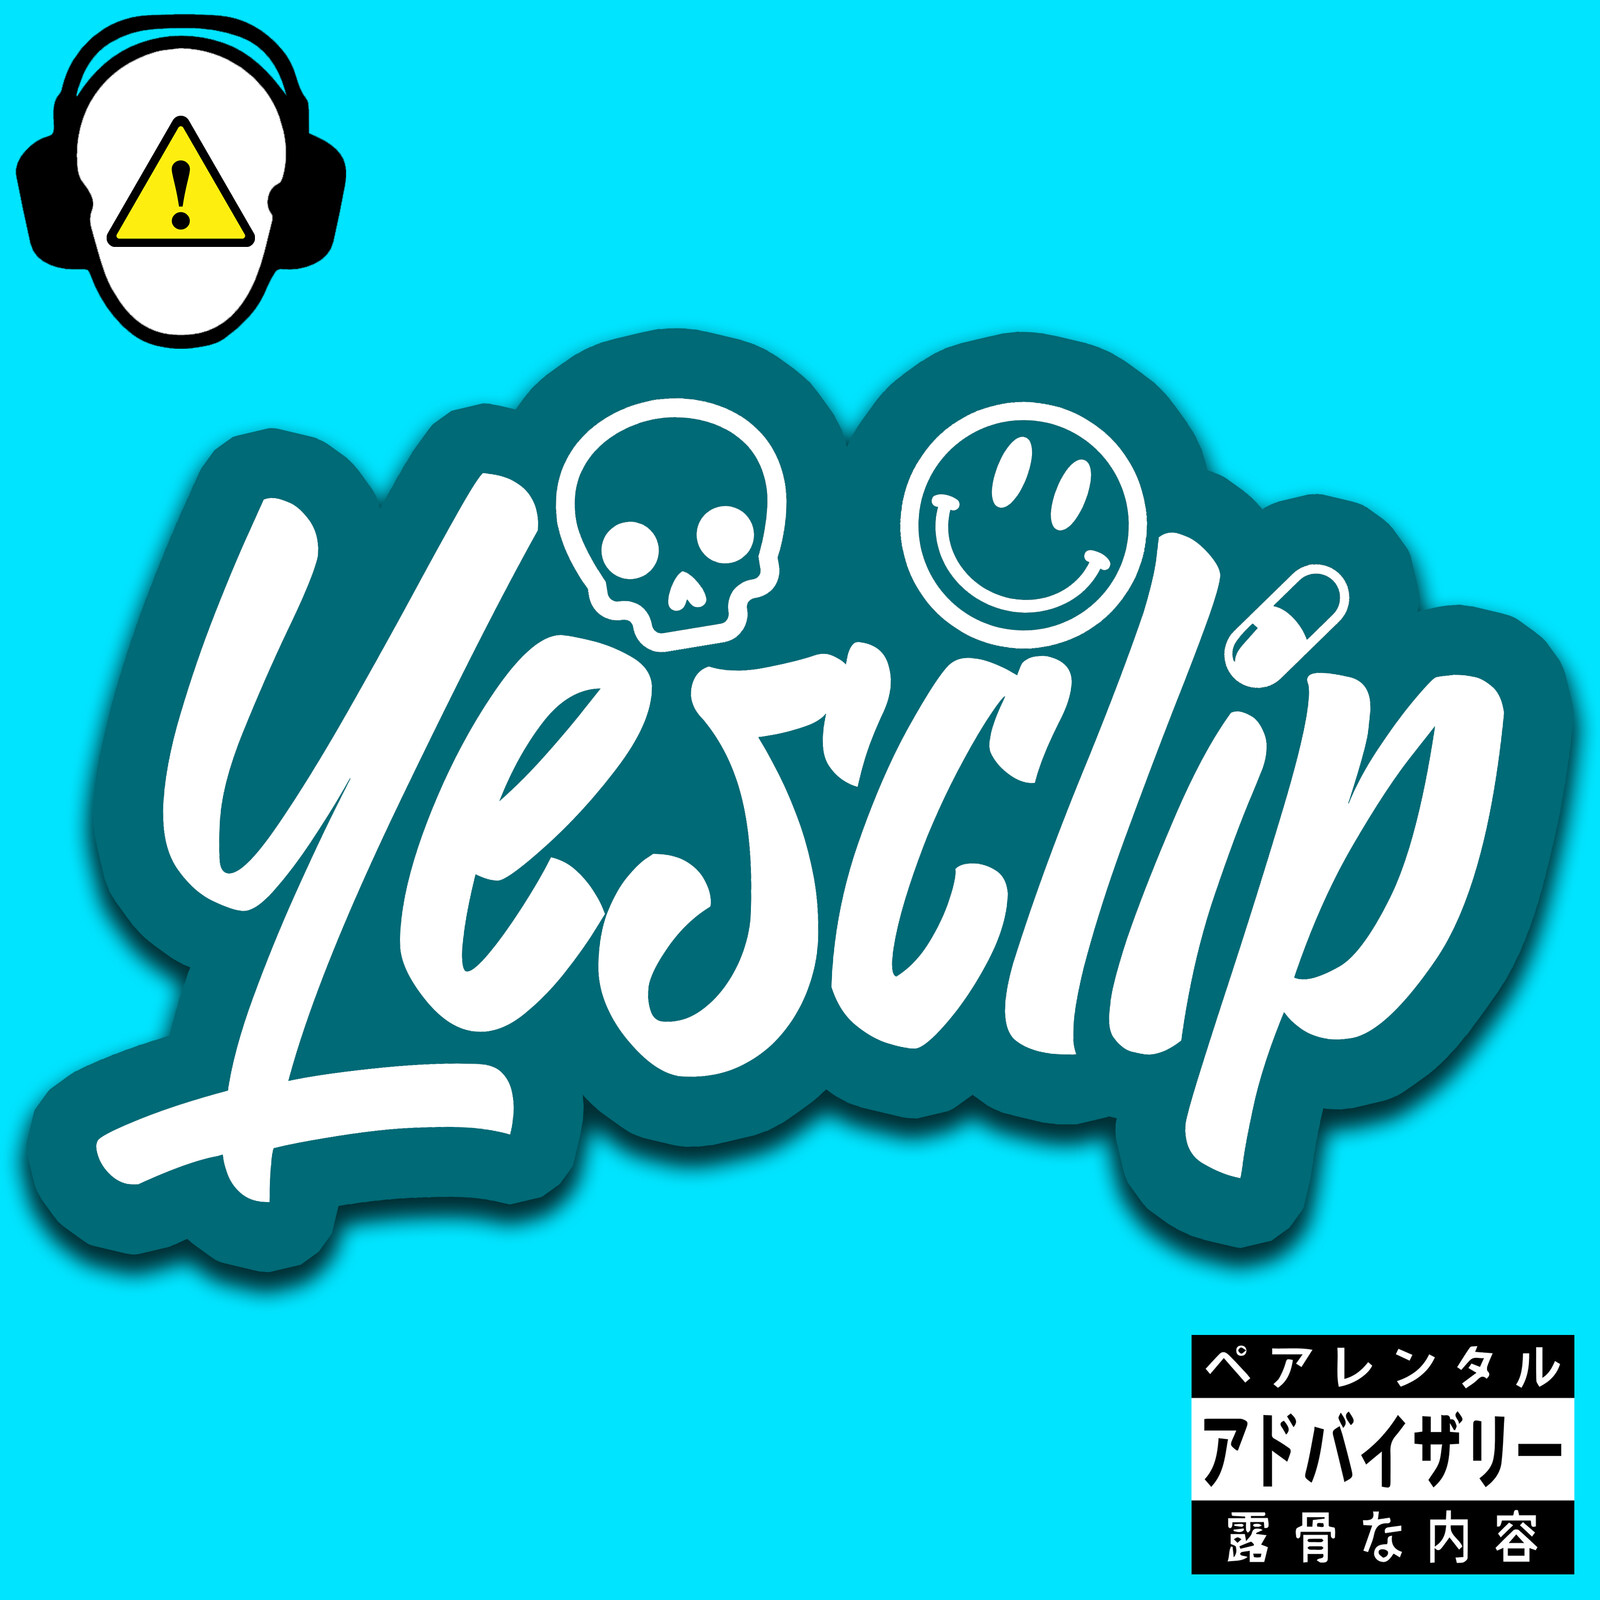 the album cover for the debut YESCLIP album: DEBUT CLIPTAPE